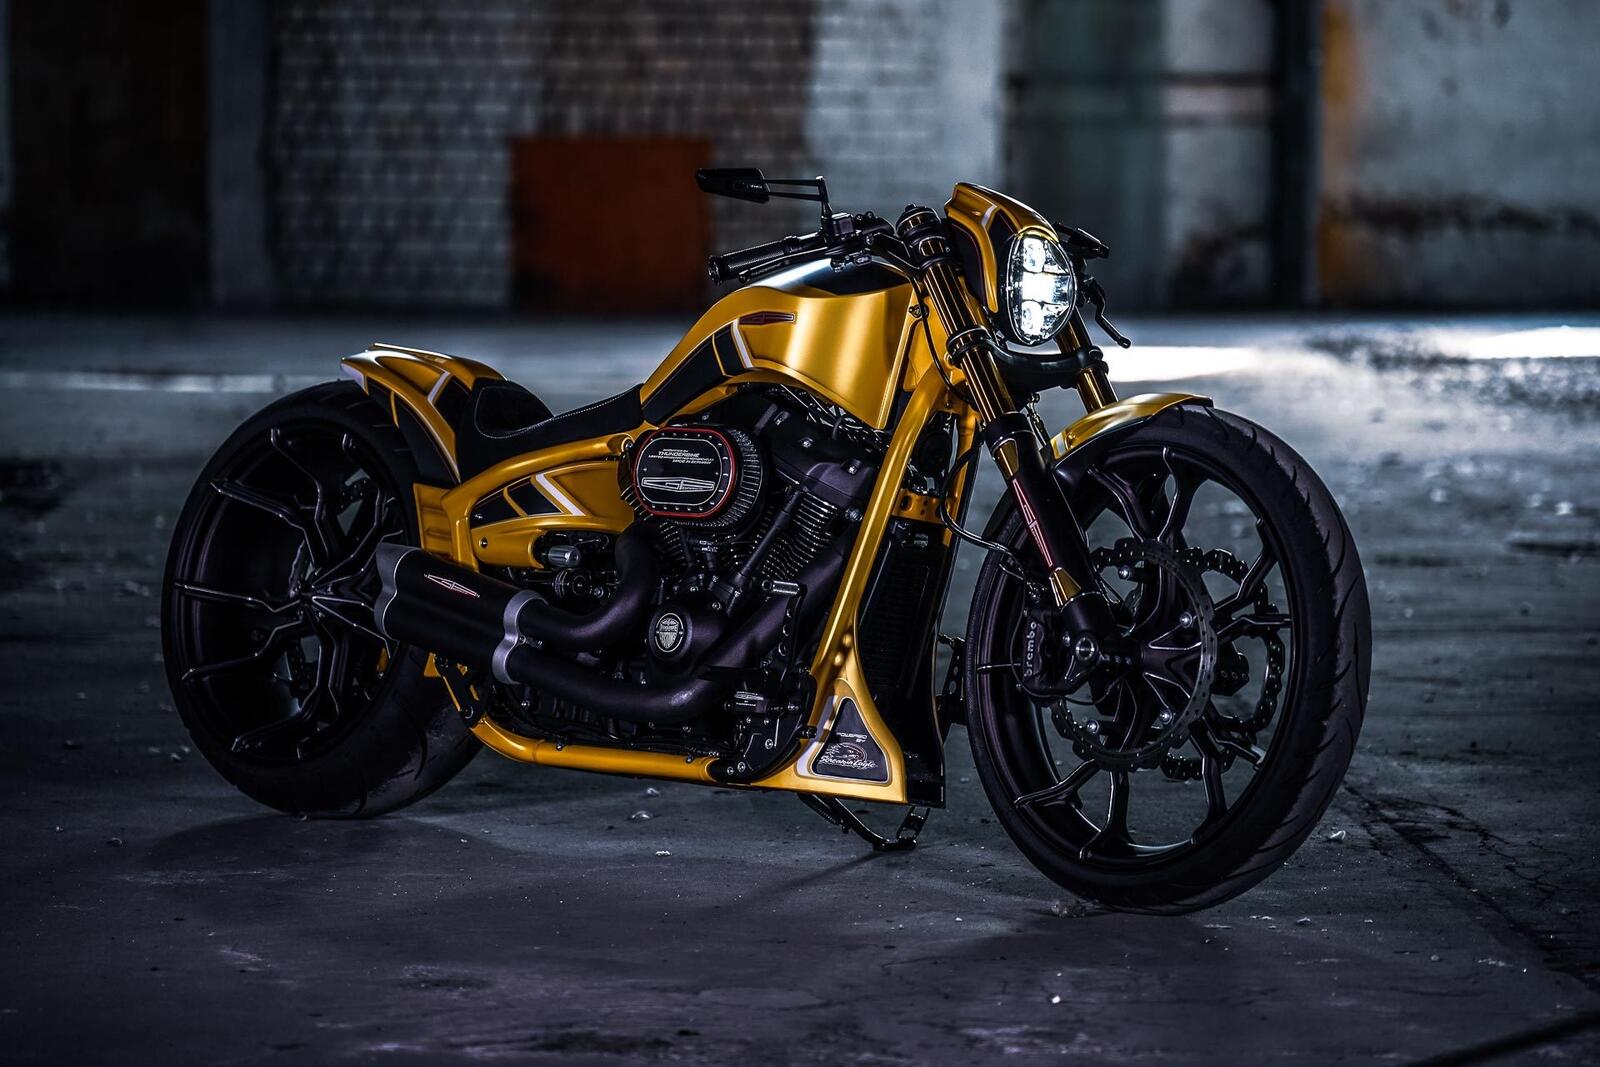 Wallpapers yellow side view wallpaper custom motorcycle on the desktop